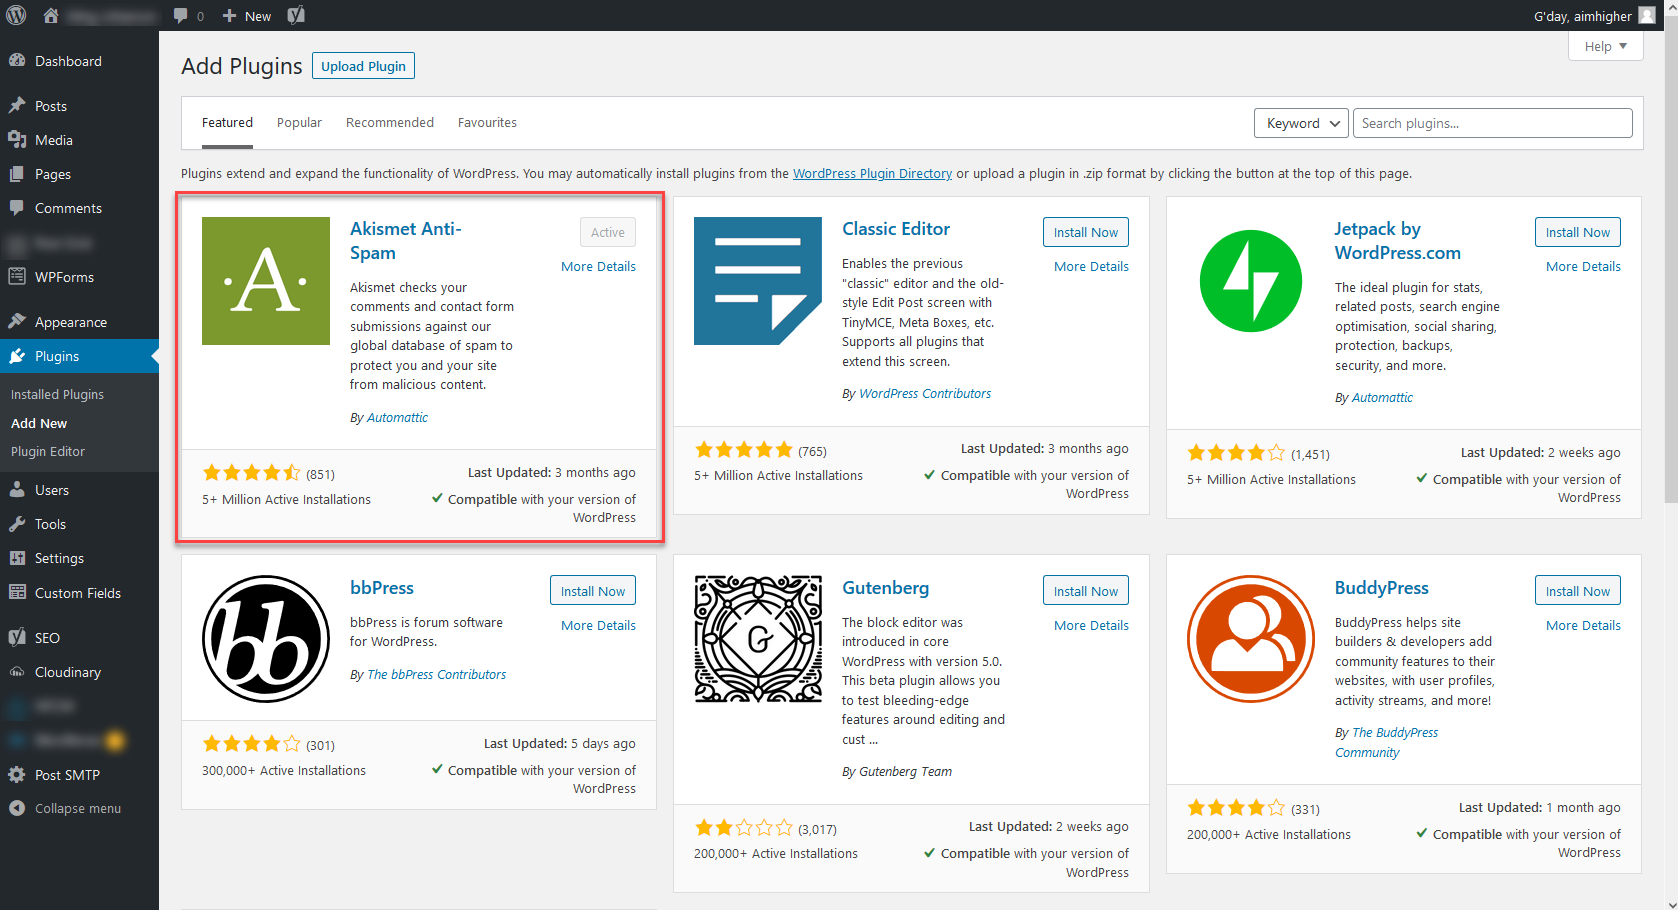 Find Akismet in the plugins section of the WordPress dashboard